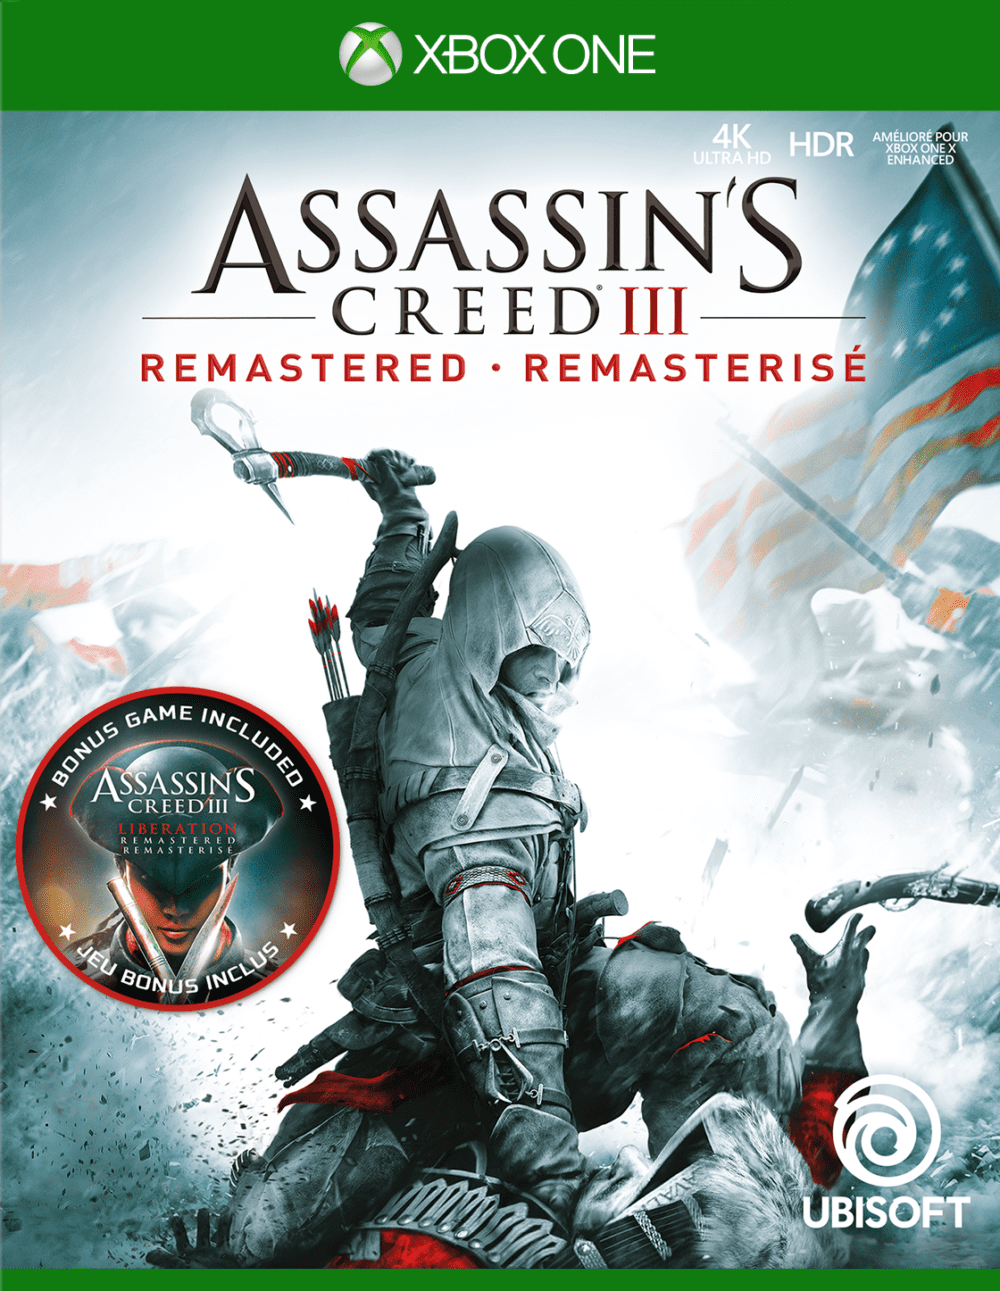 Assassin's Creed III Remastered for Xbox One